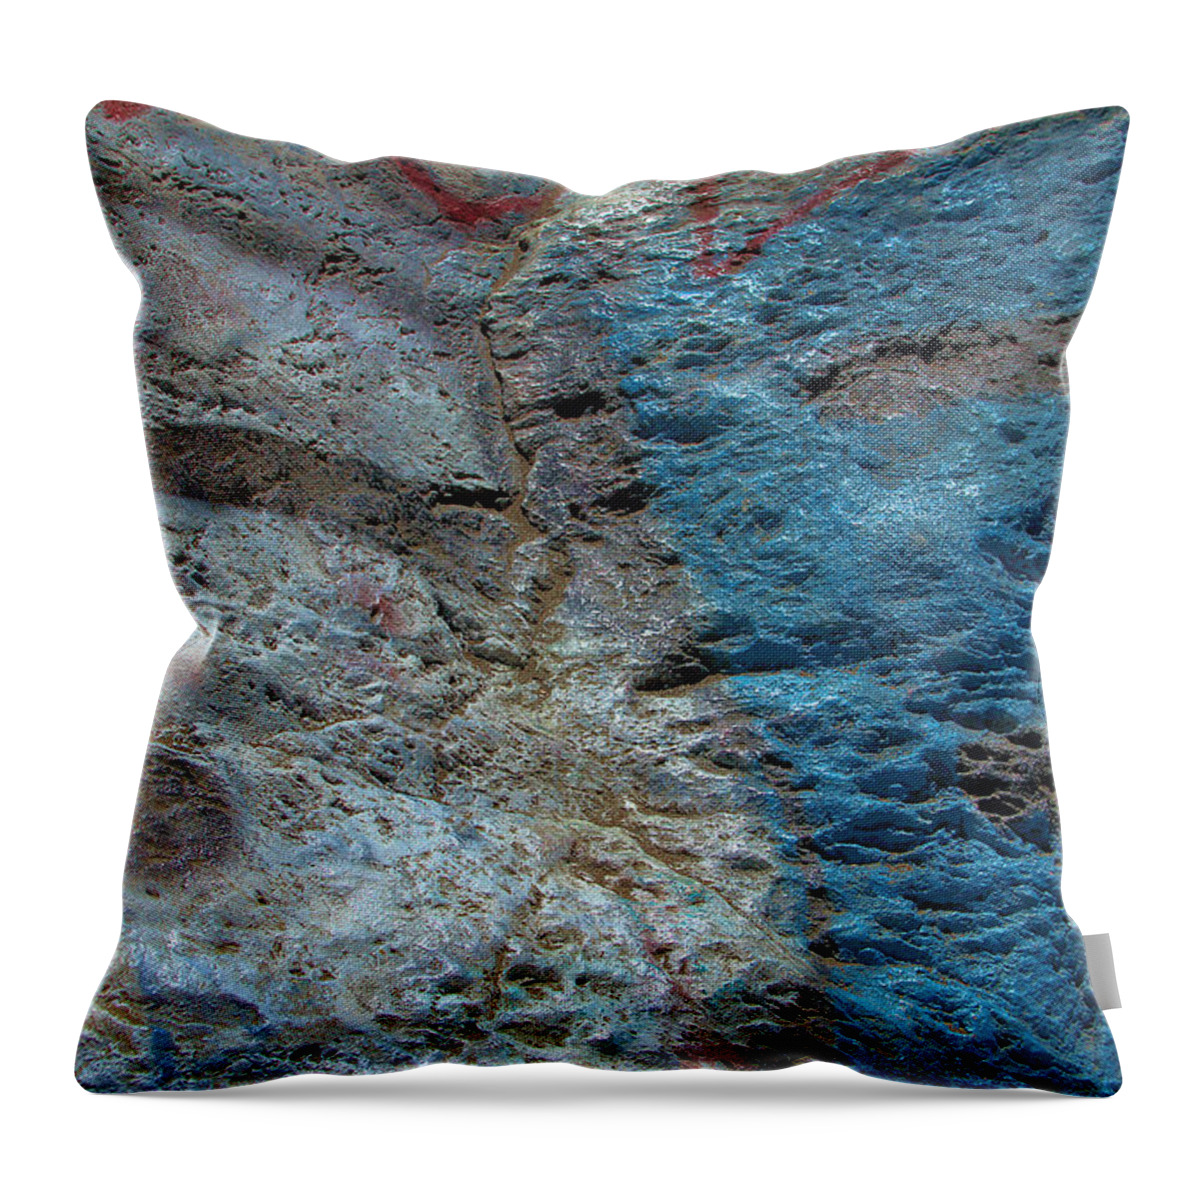 S For Silver Throw Pillow featuring the photograph S for Silver by Viktor Savchenko